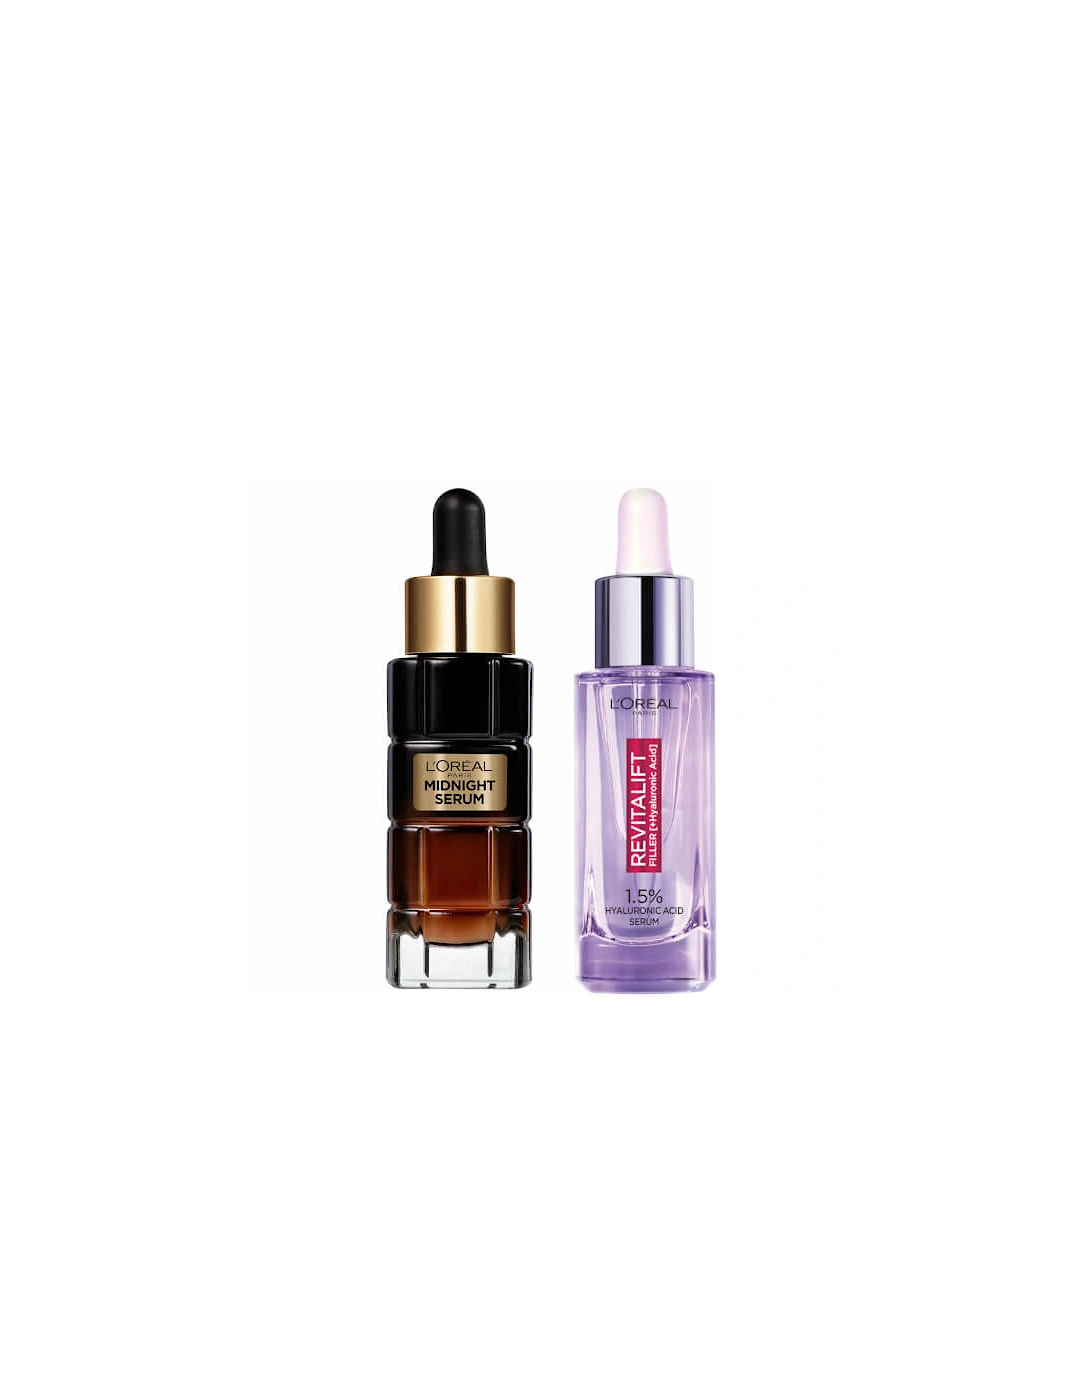 Paris Plump and Glow Serums Bundle with 1.5% Hyaluronic Acid, Vitamin E and Anti-Oxidants, 2 of 1